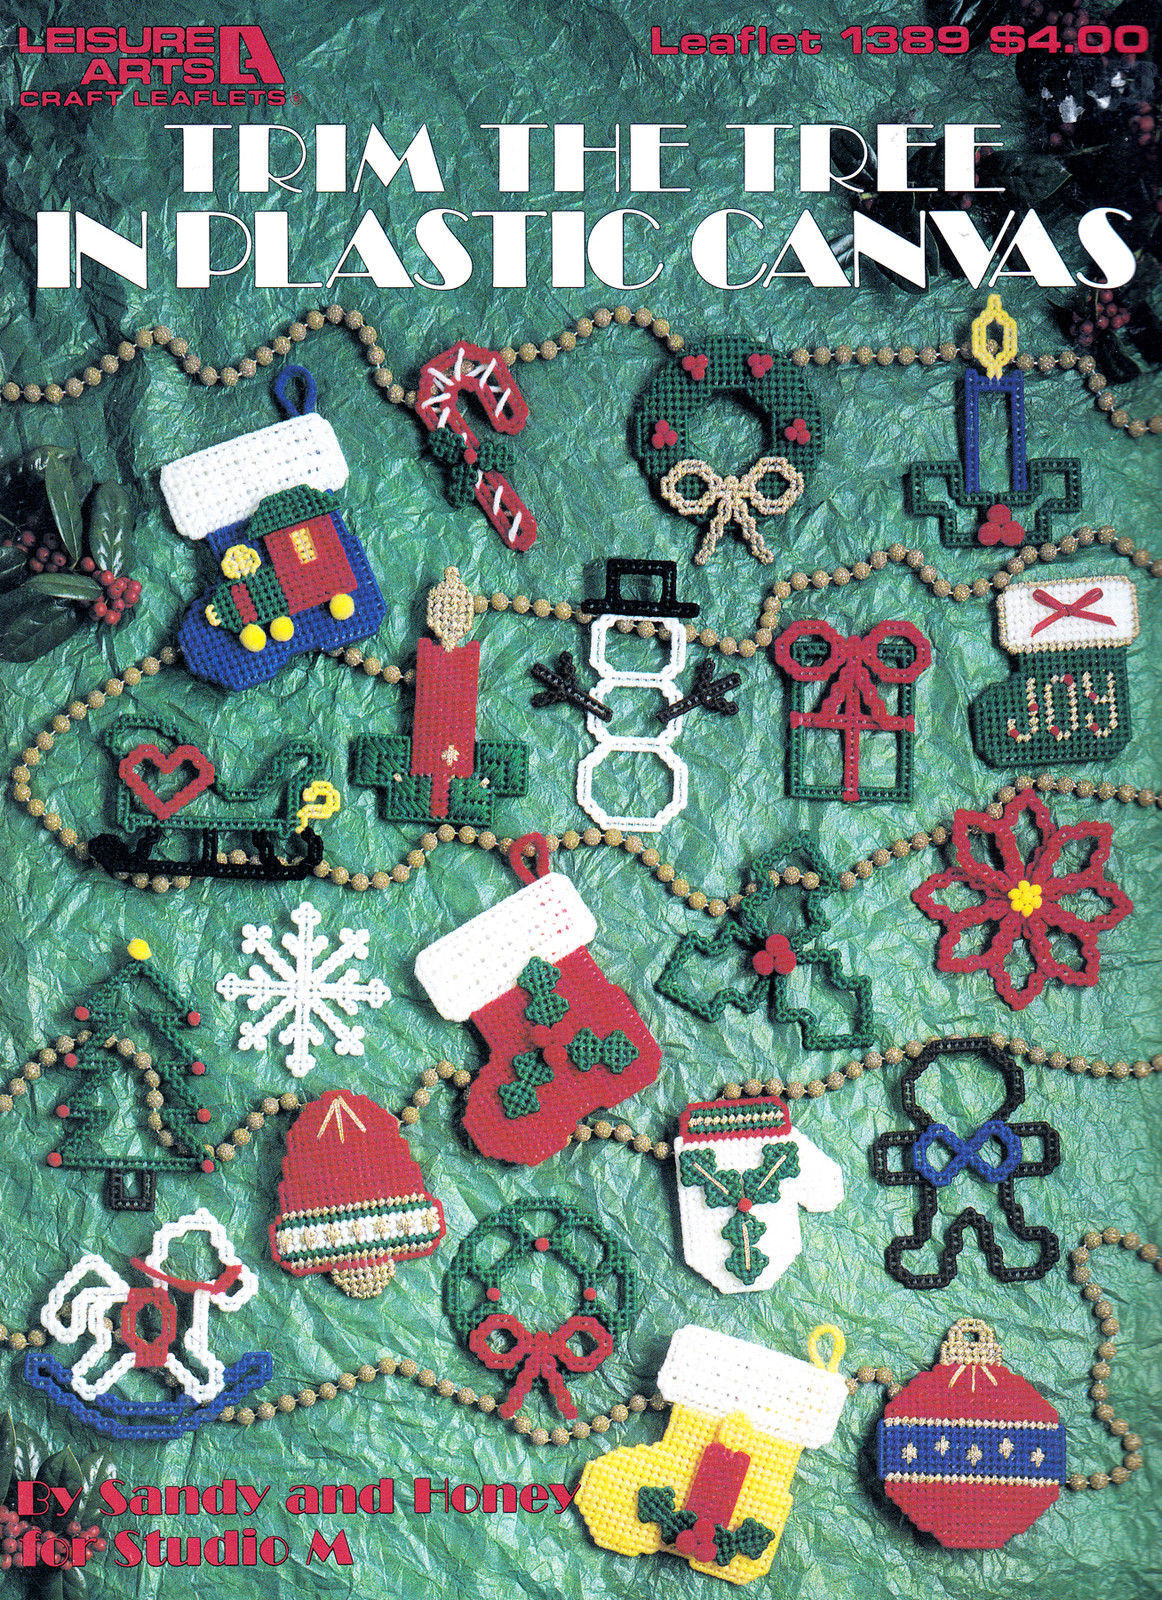 Primary image for PLASTIC CANVAS TRIM THE TREE PROJECTS #1389 LEISURE ARTS PATTERN OOP